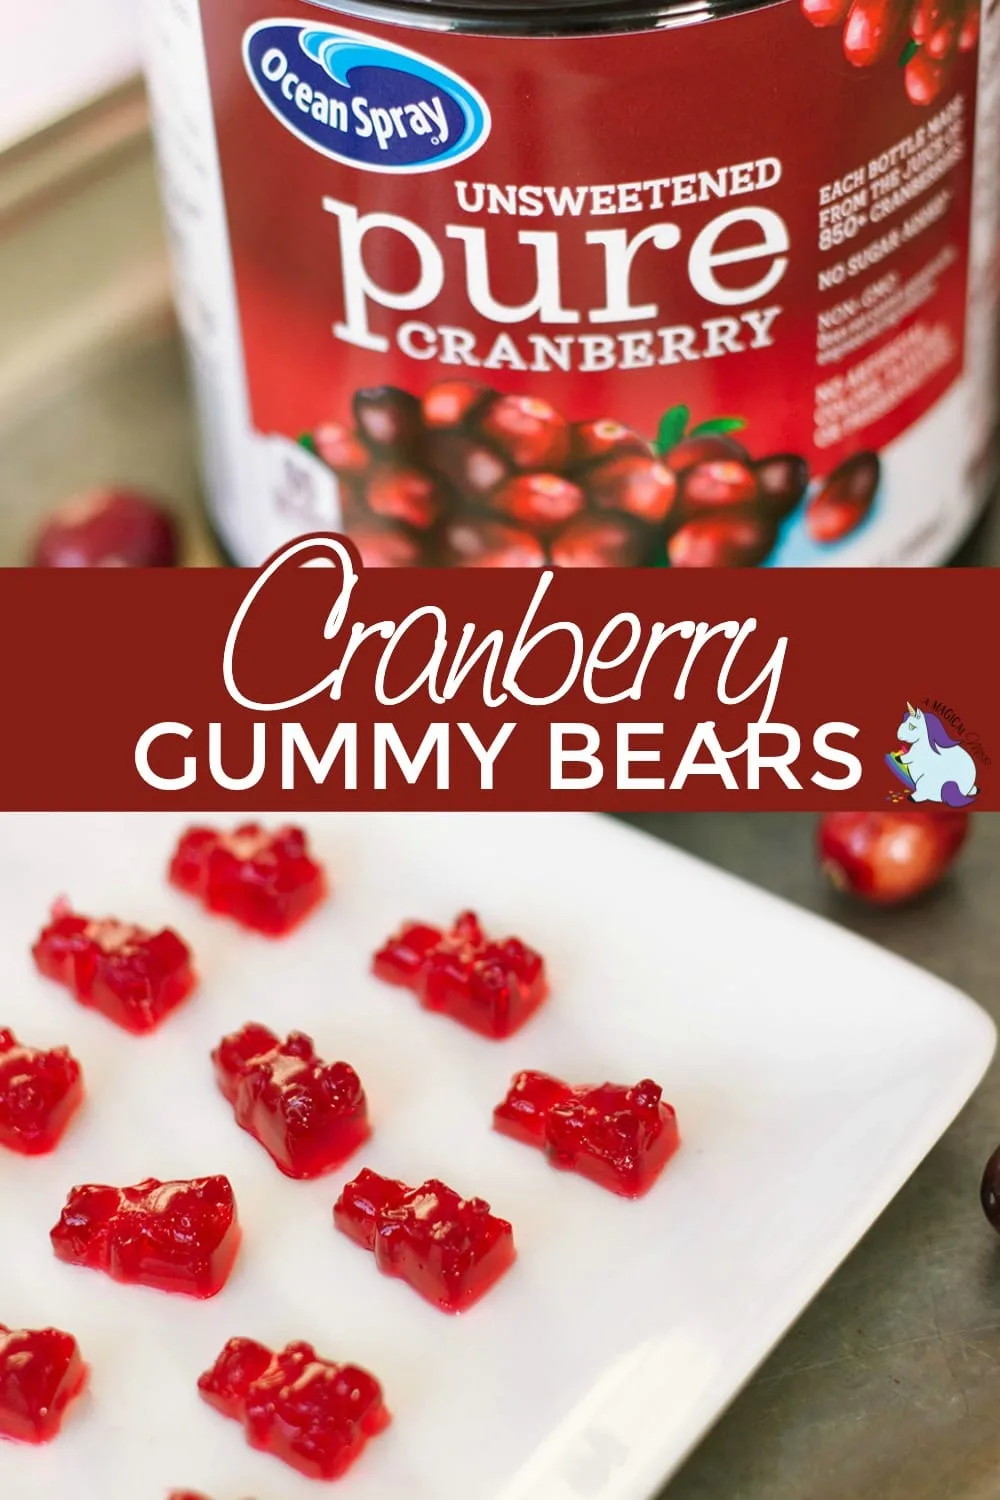 Cranberry juice bottle and plate of gummy bears.